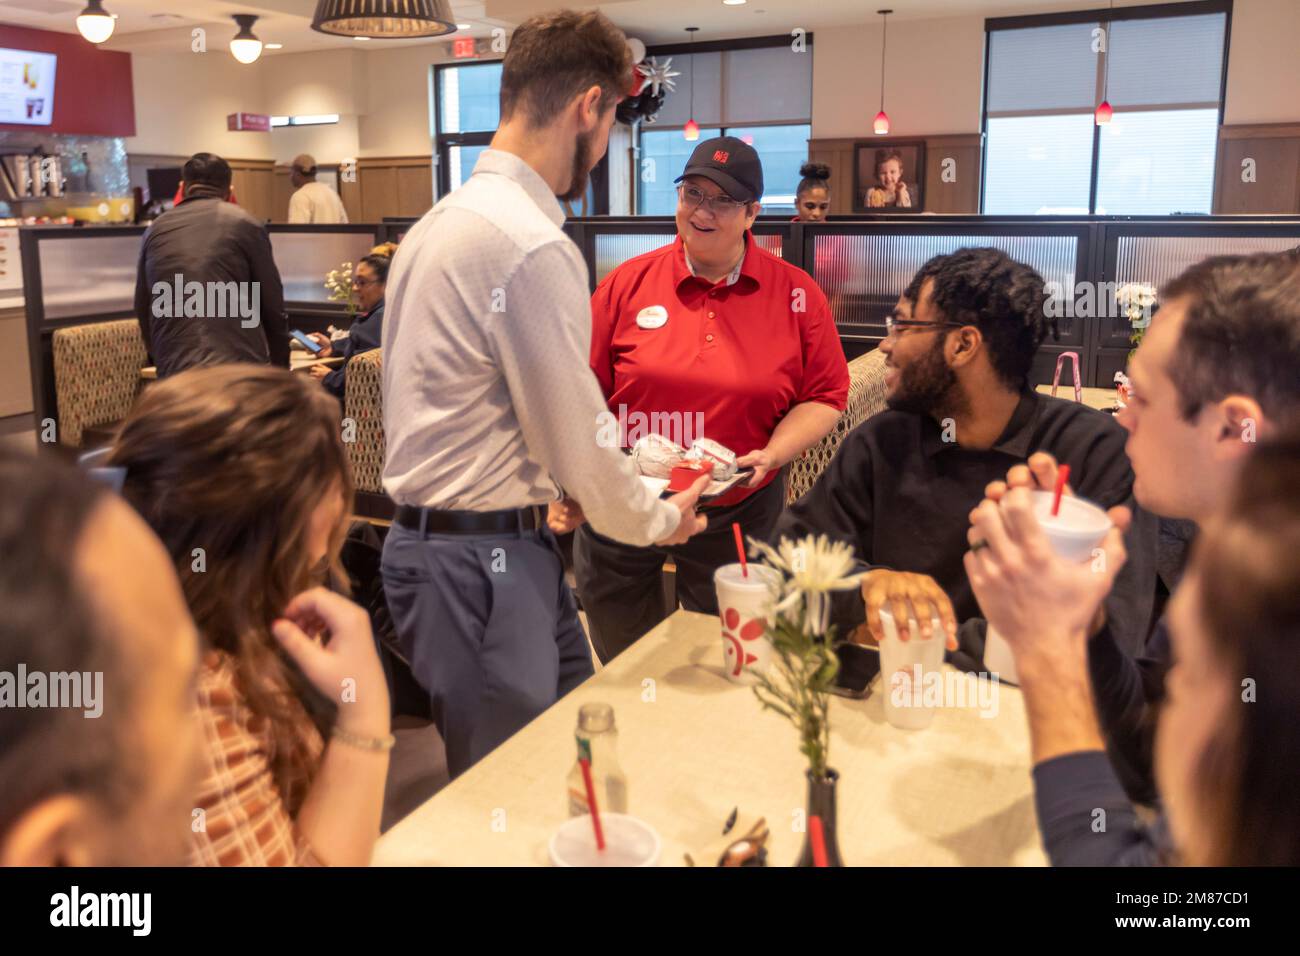 Livonia, Michigan - A worker at Chick-fil-A delivers an order to a table on the day of the restaurant's grand opening. Stock Photo